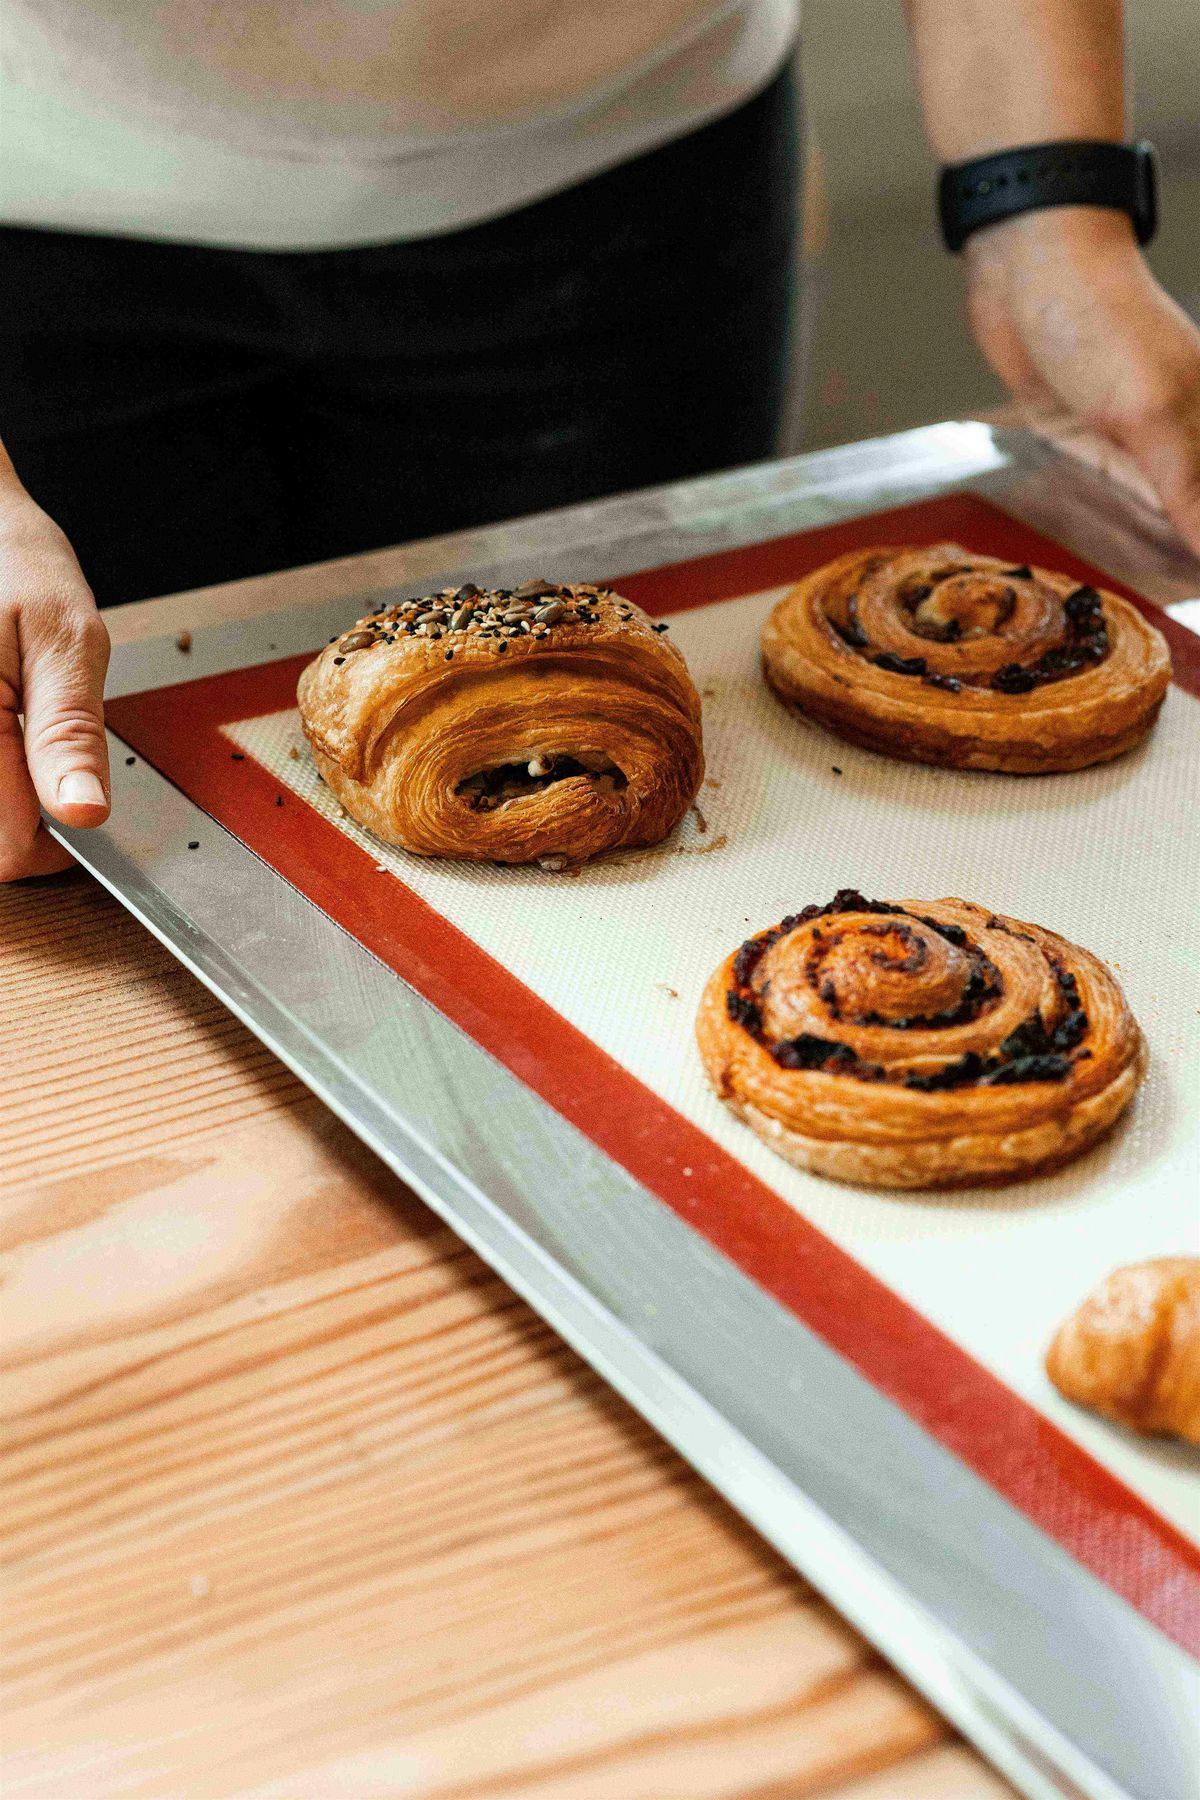 The Islander Festival - Workshop Wednesdays: Viennoiserie with Layers